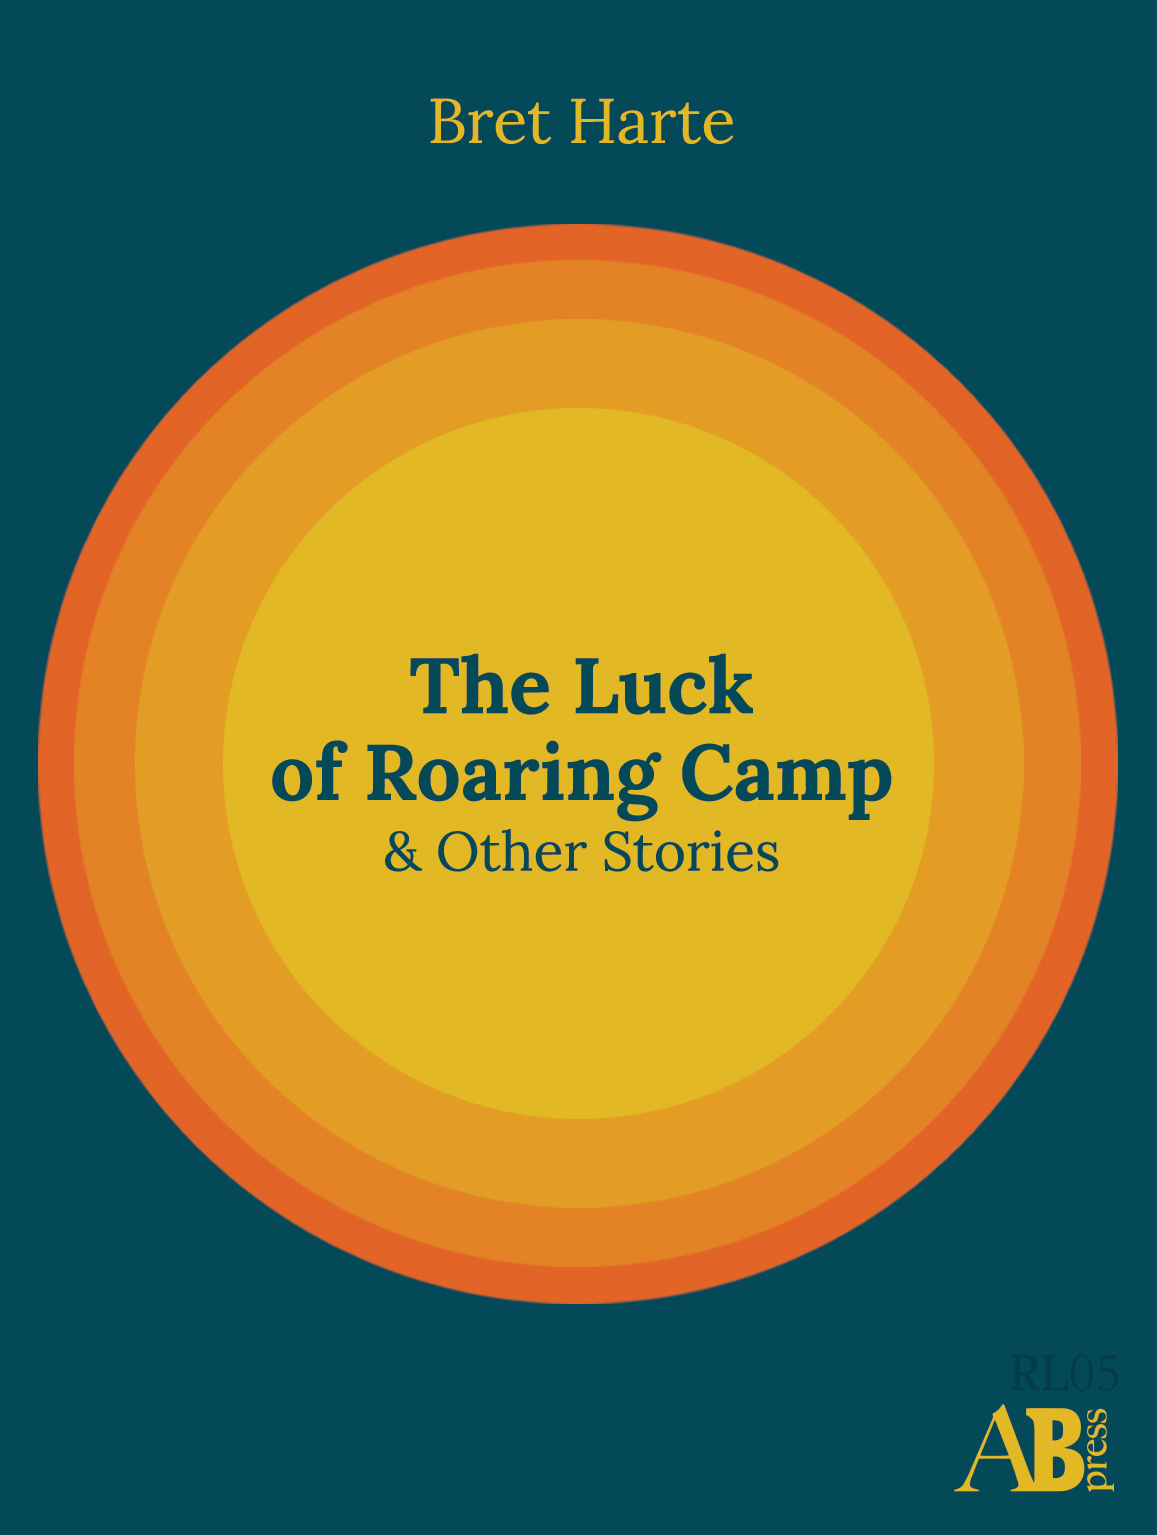 The Luck of Roaring Camp and Other Tales by Harte, Bret, 1836-1902